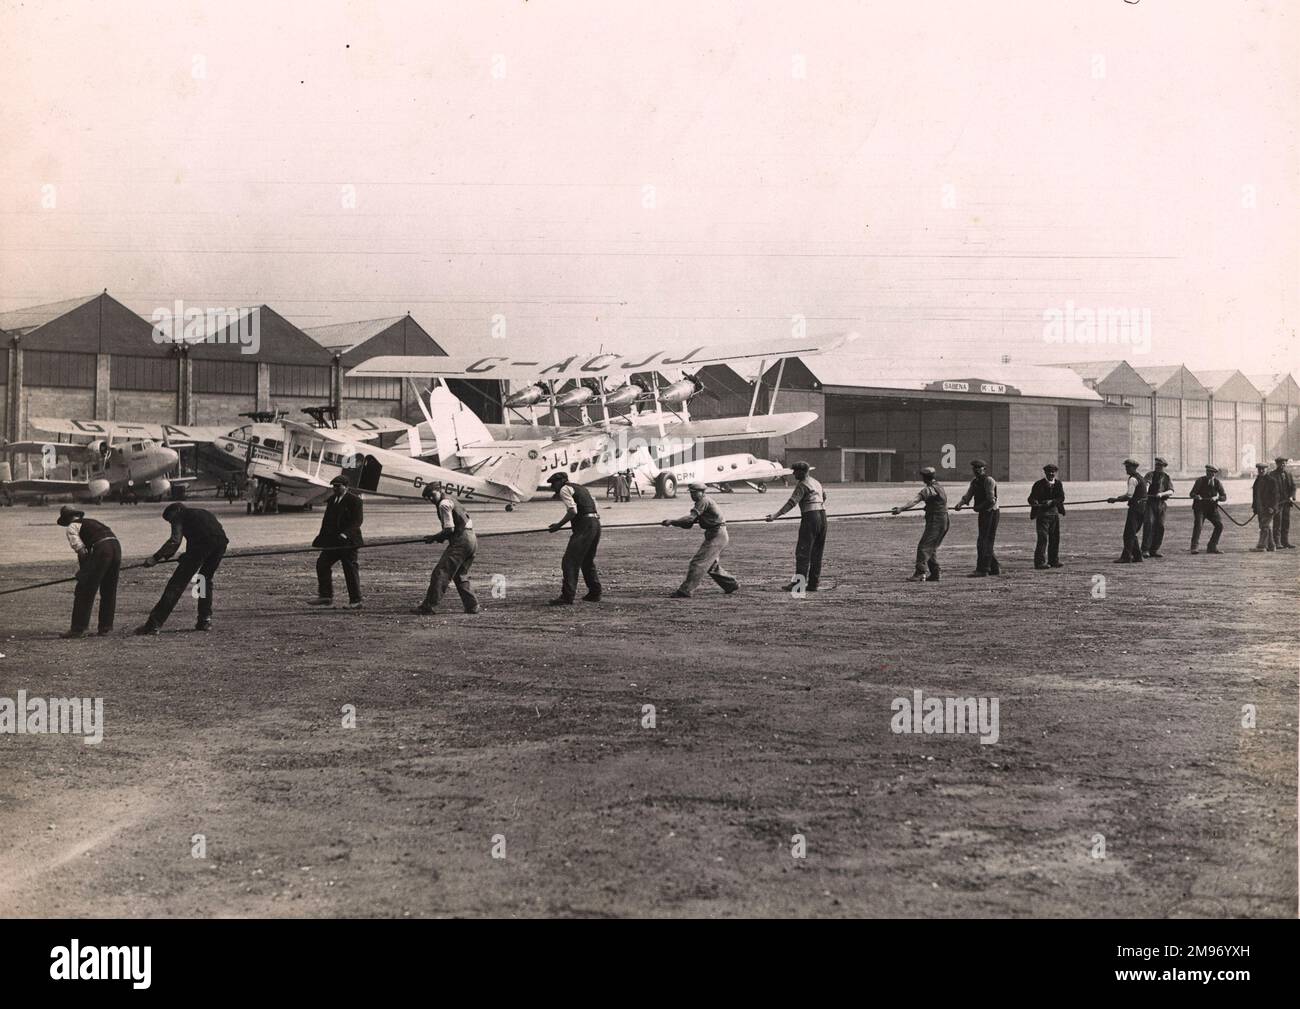 Engineers laying a new electric cable at Croydon Airport in March 1935. Among the aircraft in the background are Boulton & Paul P71A, G-ACOX, Boadicea, of Imperial Airways; Short L17, G-ACJJ, Scylla; de Havilland DH86, G-ACVZ, Jupiter, of Railway Air Services and Avro 652, G-ACRN, Ava. Stock Photo